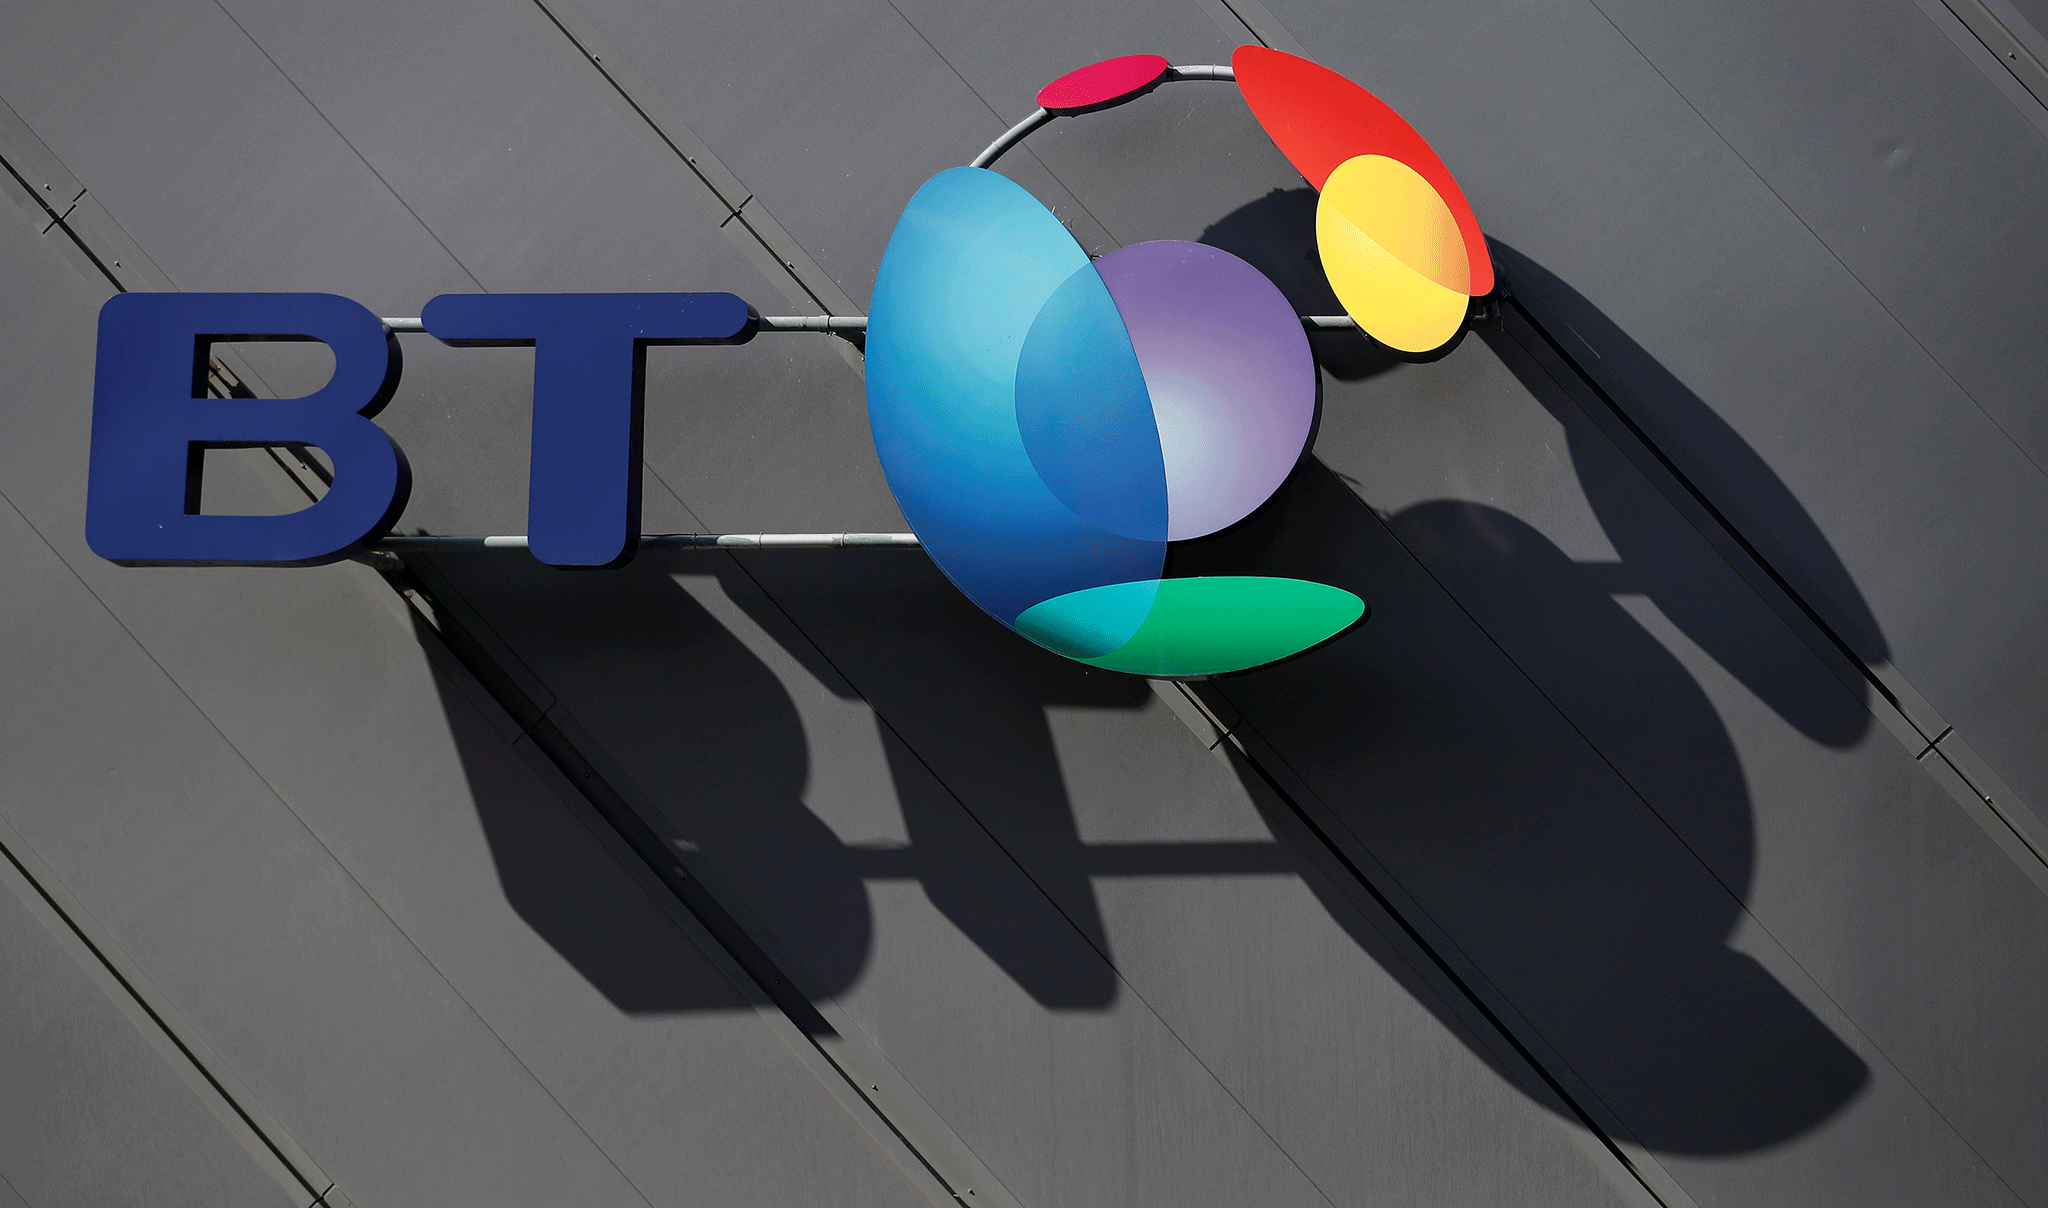 The level of financial discomfort to BT and its shareholders is more along the lines of what you might expect from a ’flu jab than anything more serious